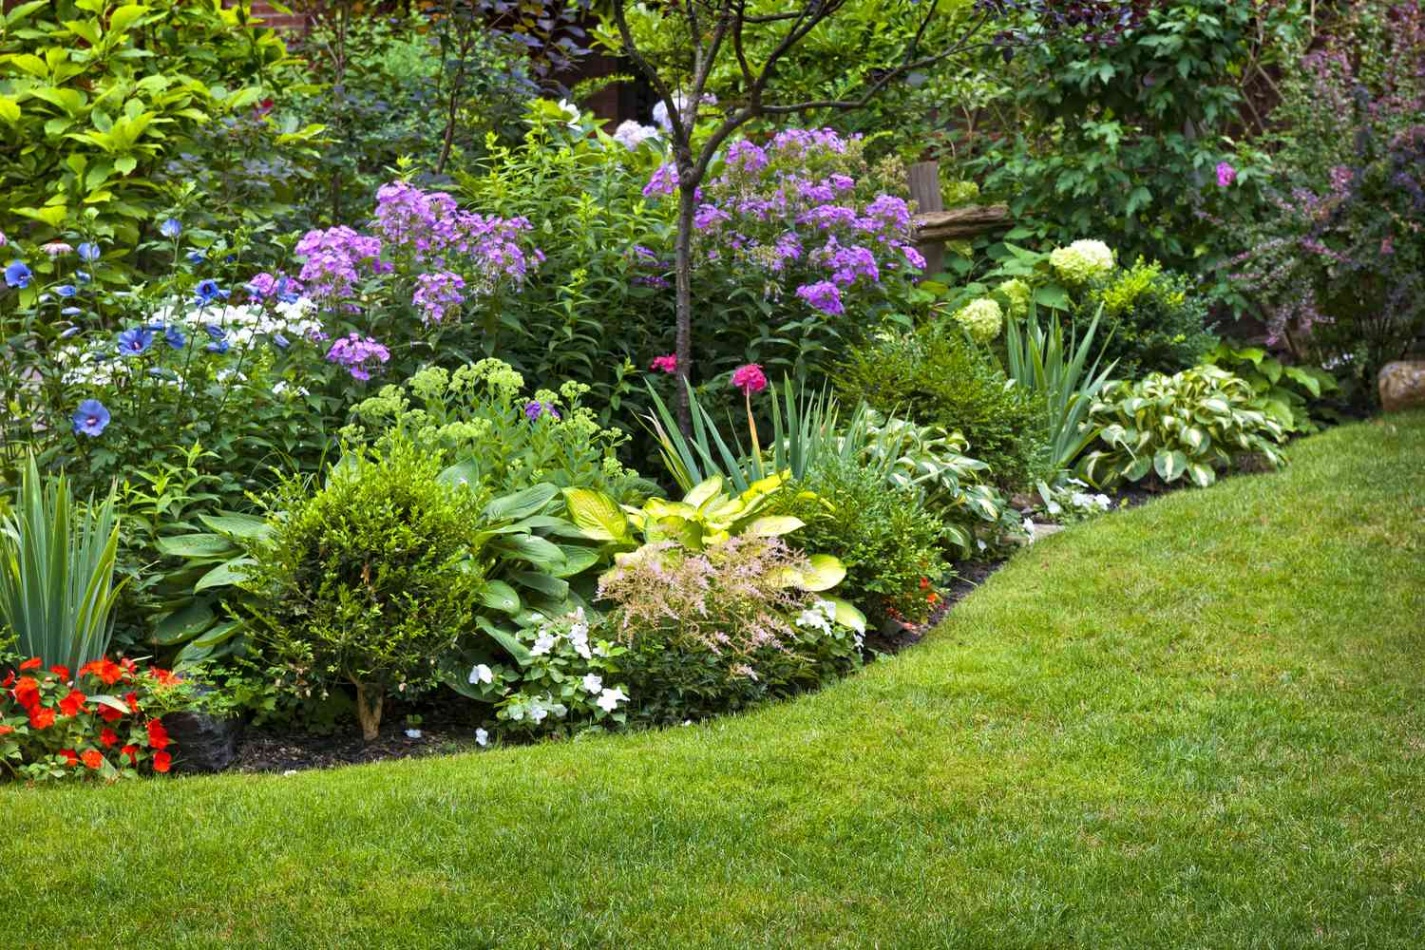 Get Inspired With These Out-of-the-box Landscape Design Ideas For Your Outdoor Space